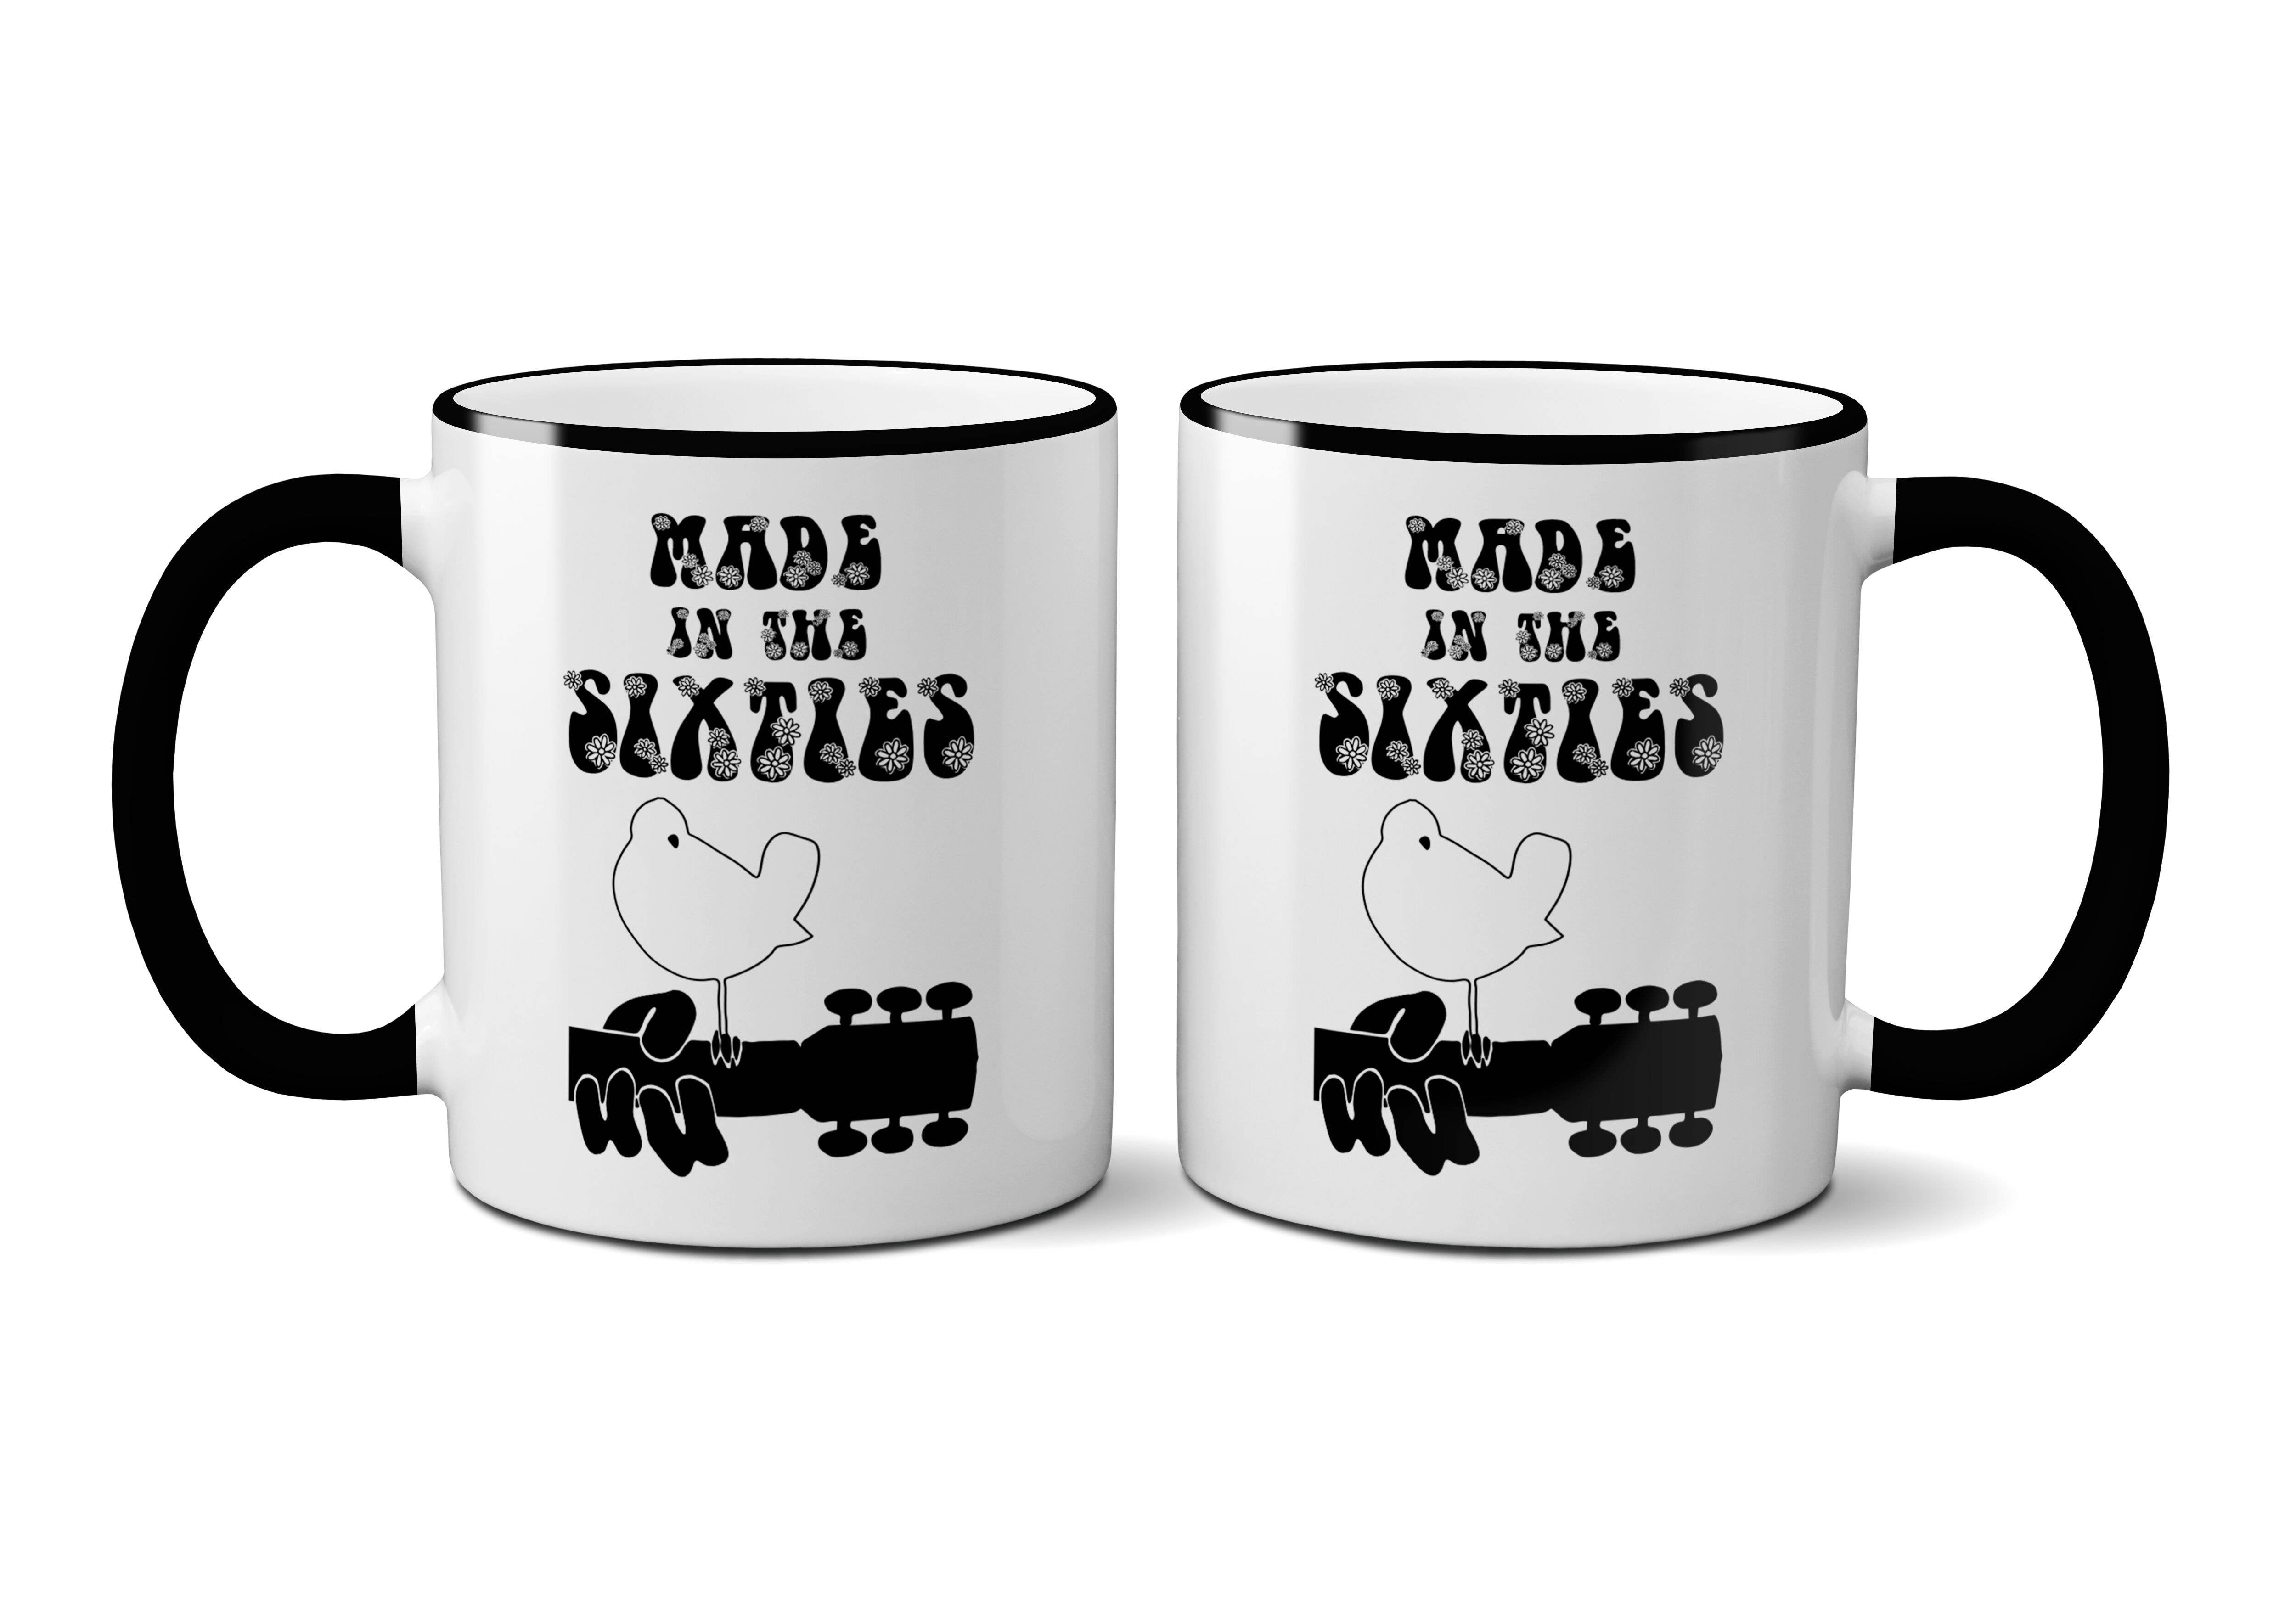 Made in the 60’s Mug